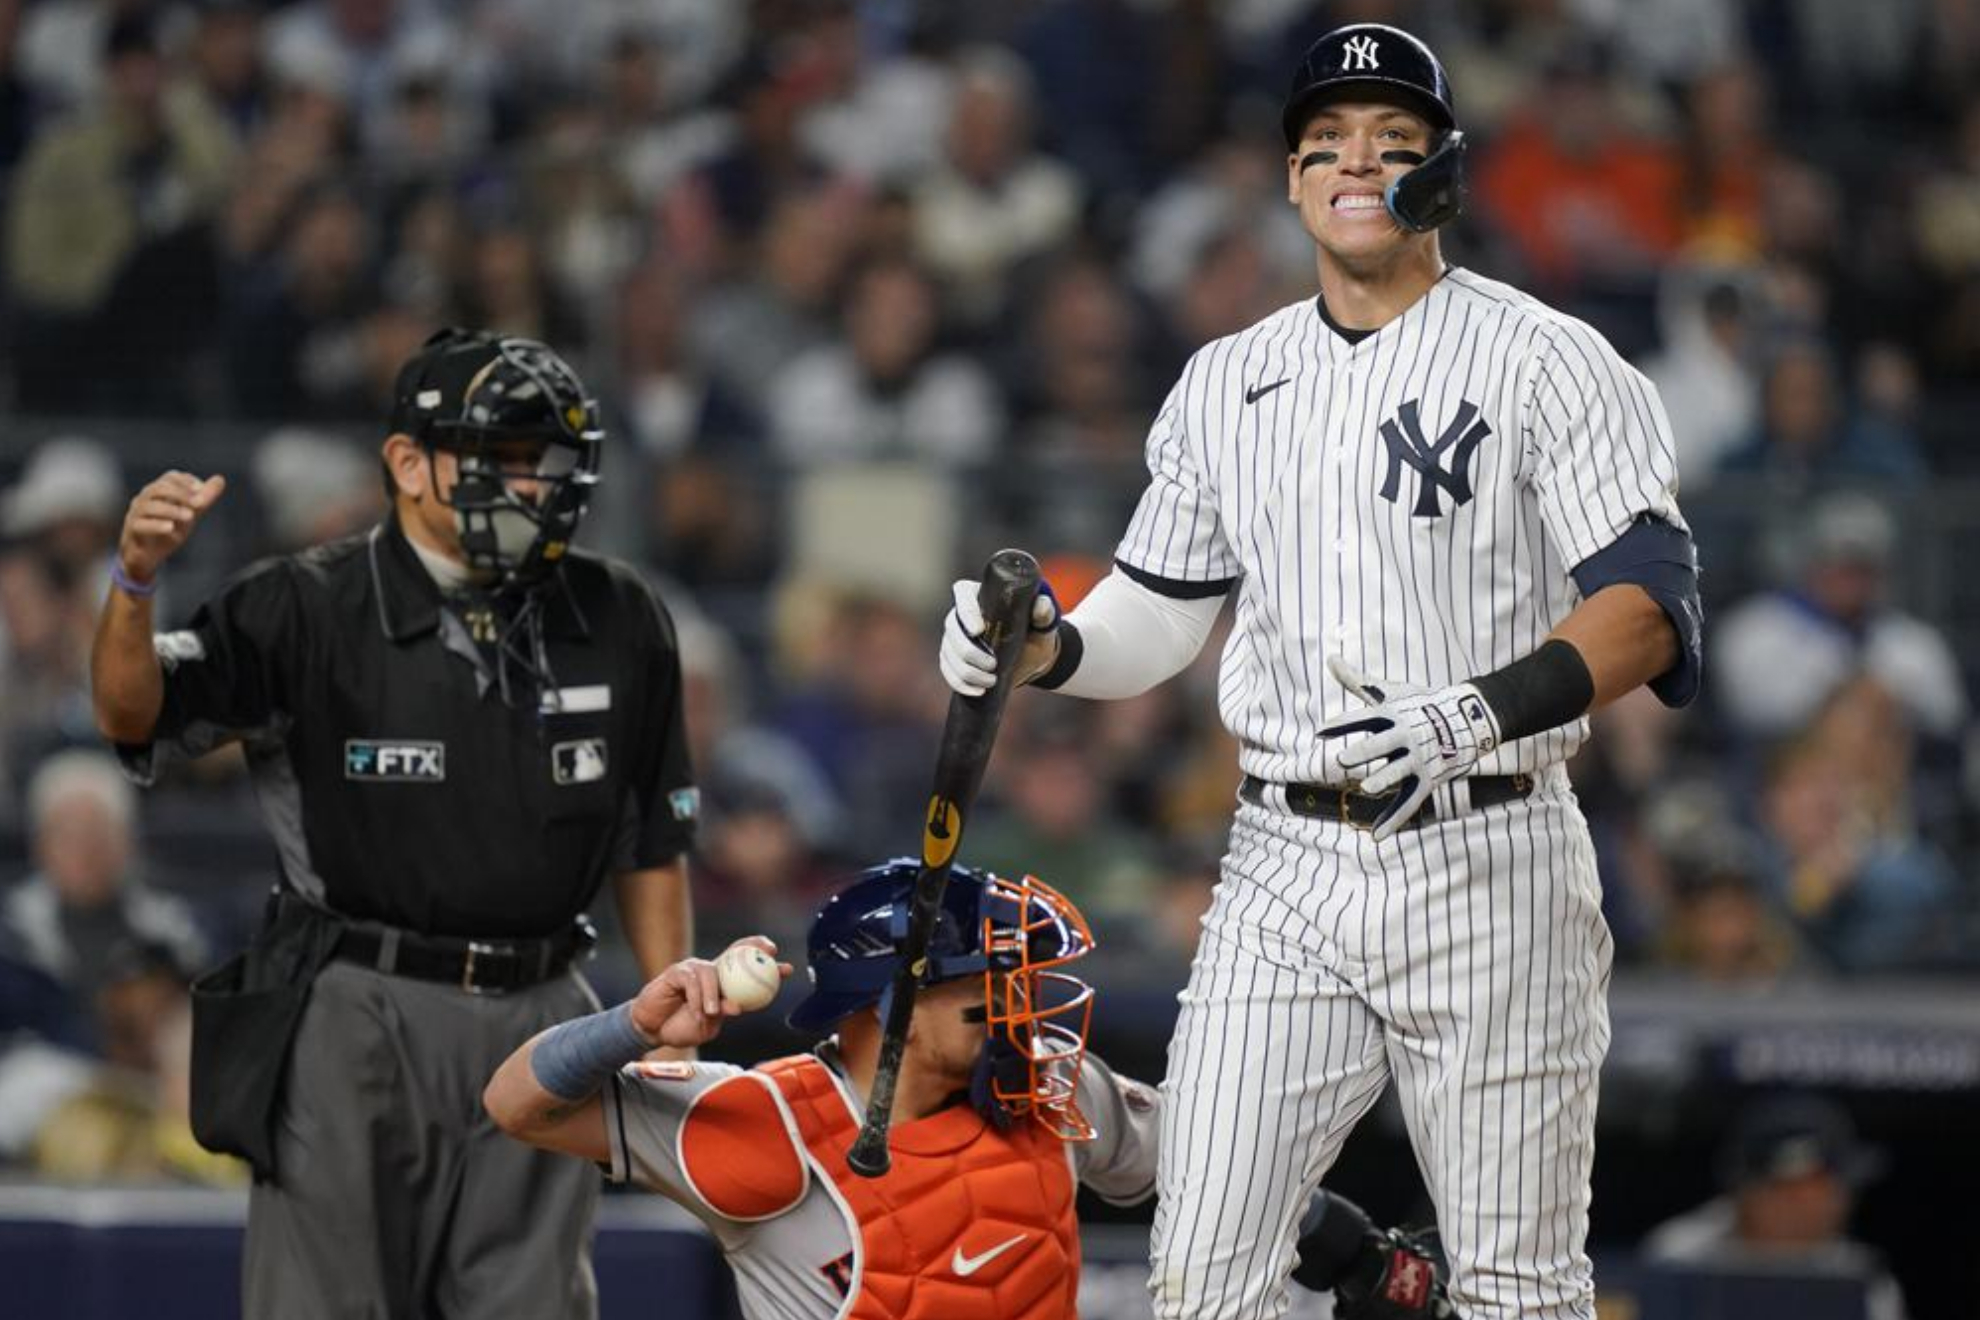 Aaron Judge reacts after striking out against the Houston Astros.